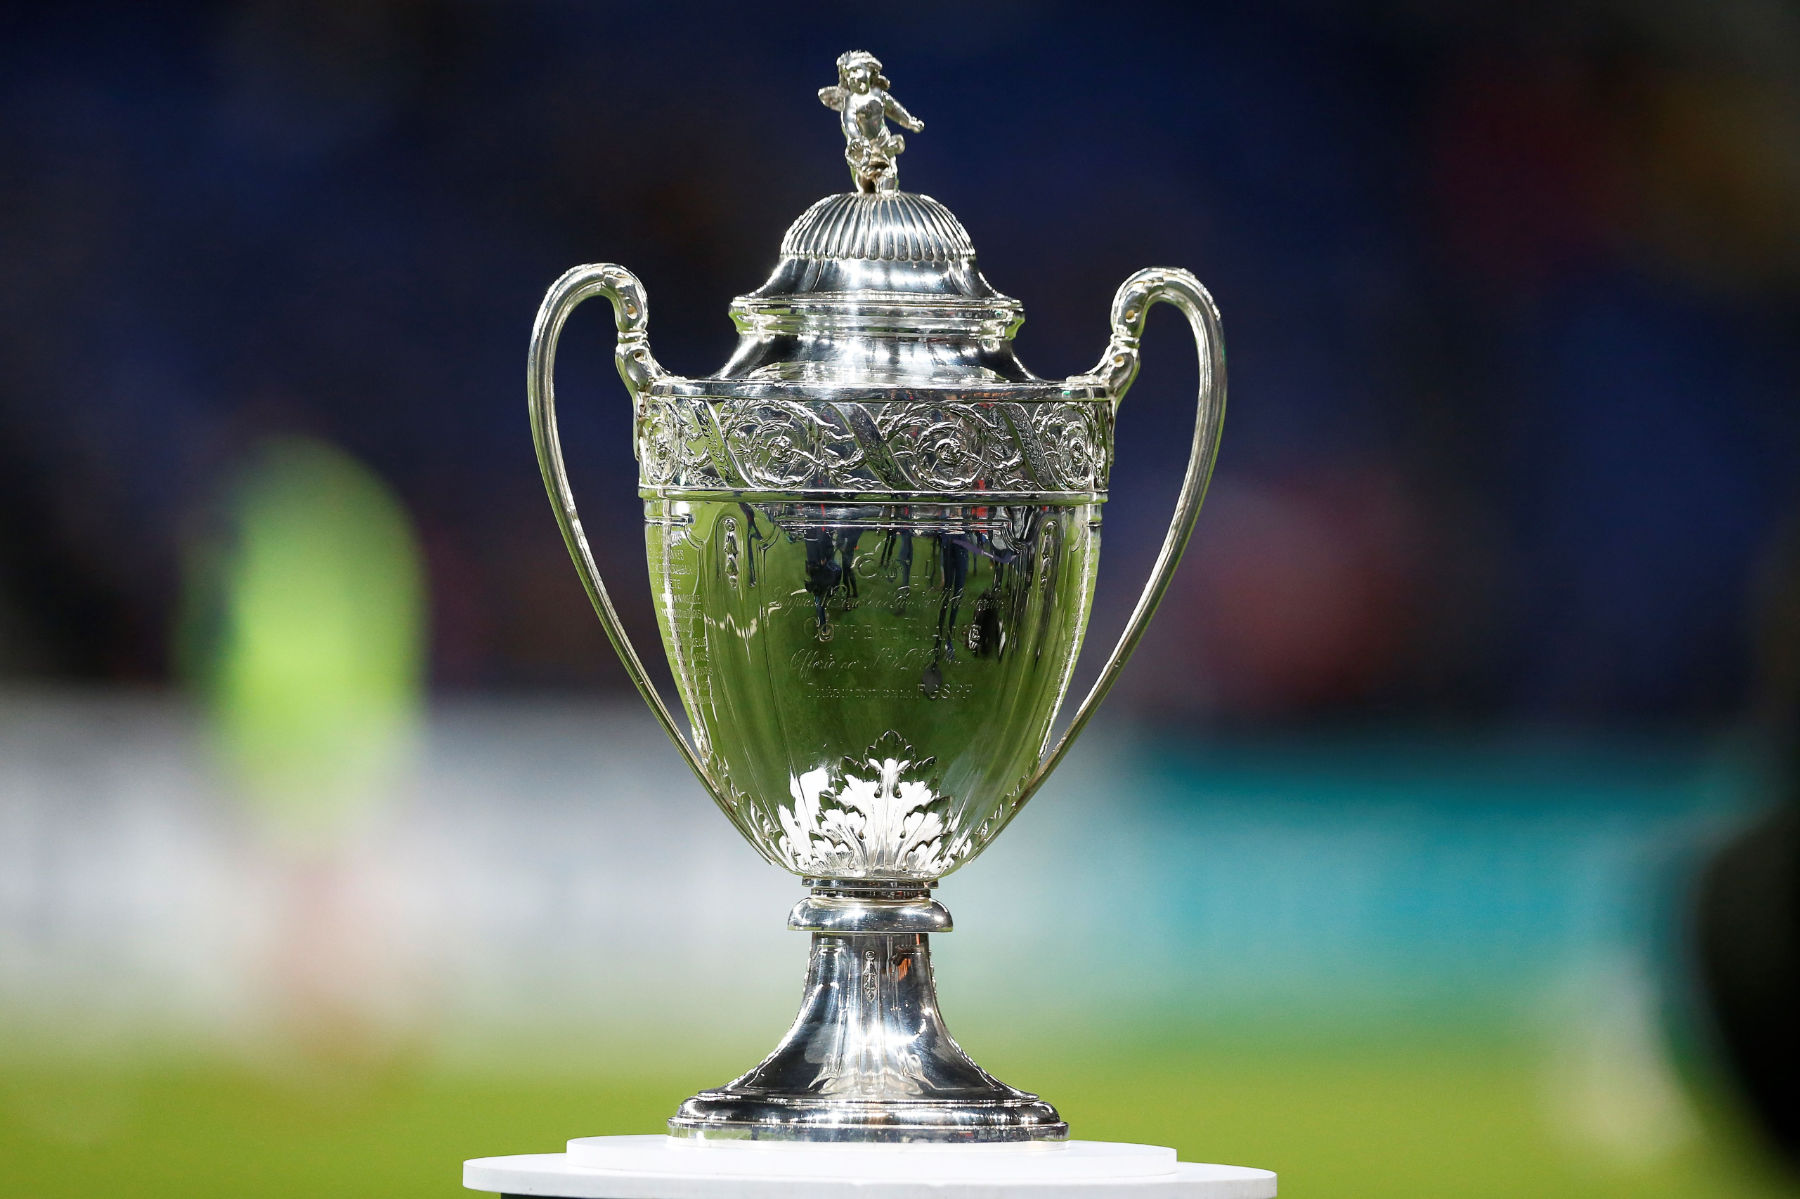 French football set to return with Coupe de France starting from July 24